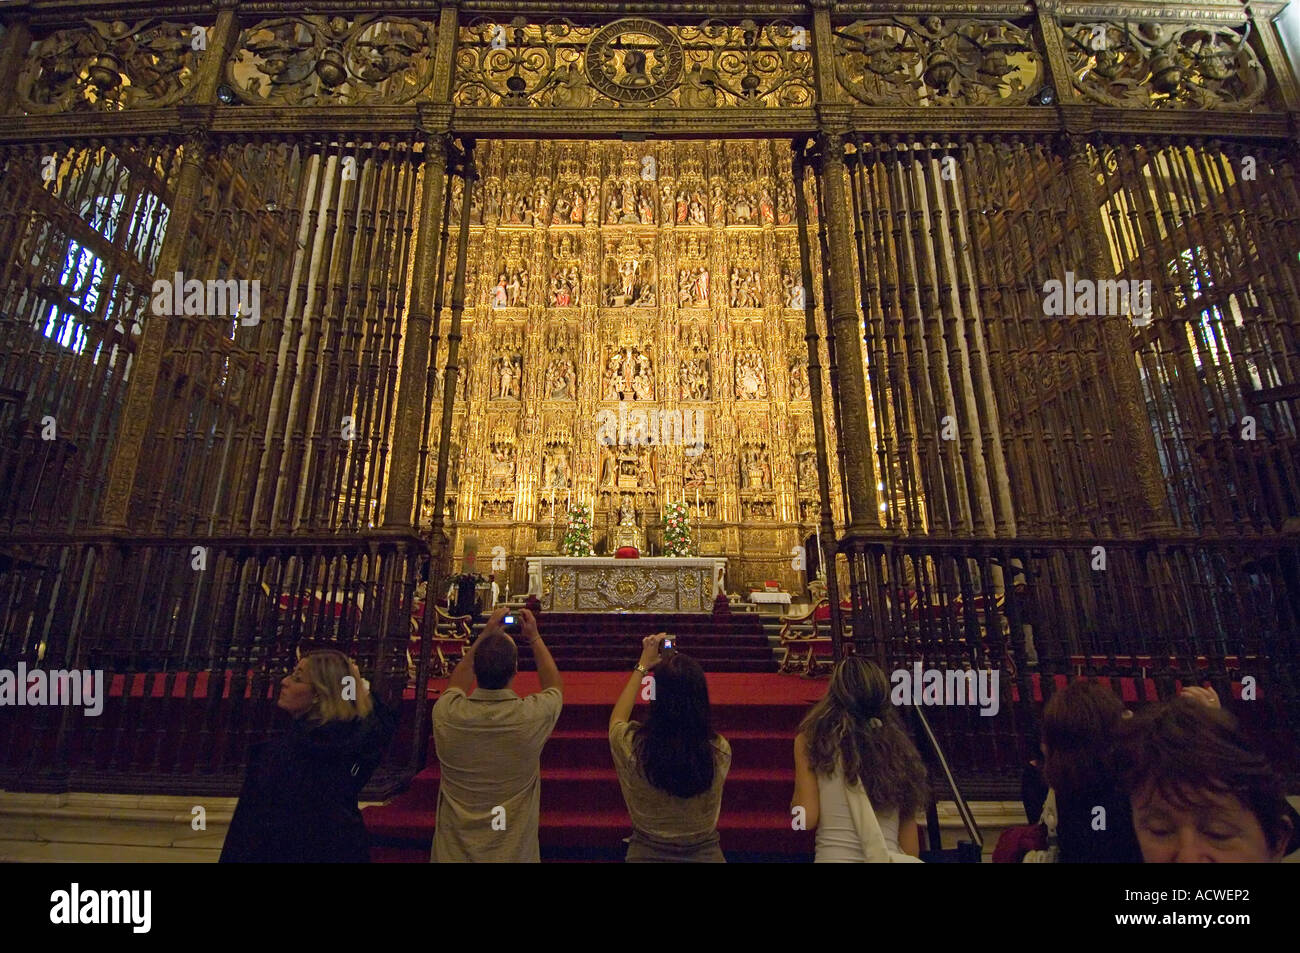 Visitors holding up cameras mimic supplicant pilgrims at the golden altarpiece in Seville cathedral - Andalusia, Spain Stock Photo